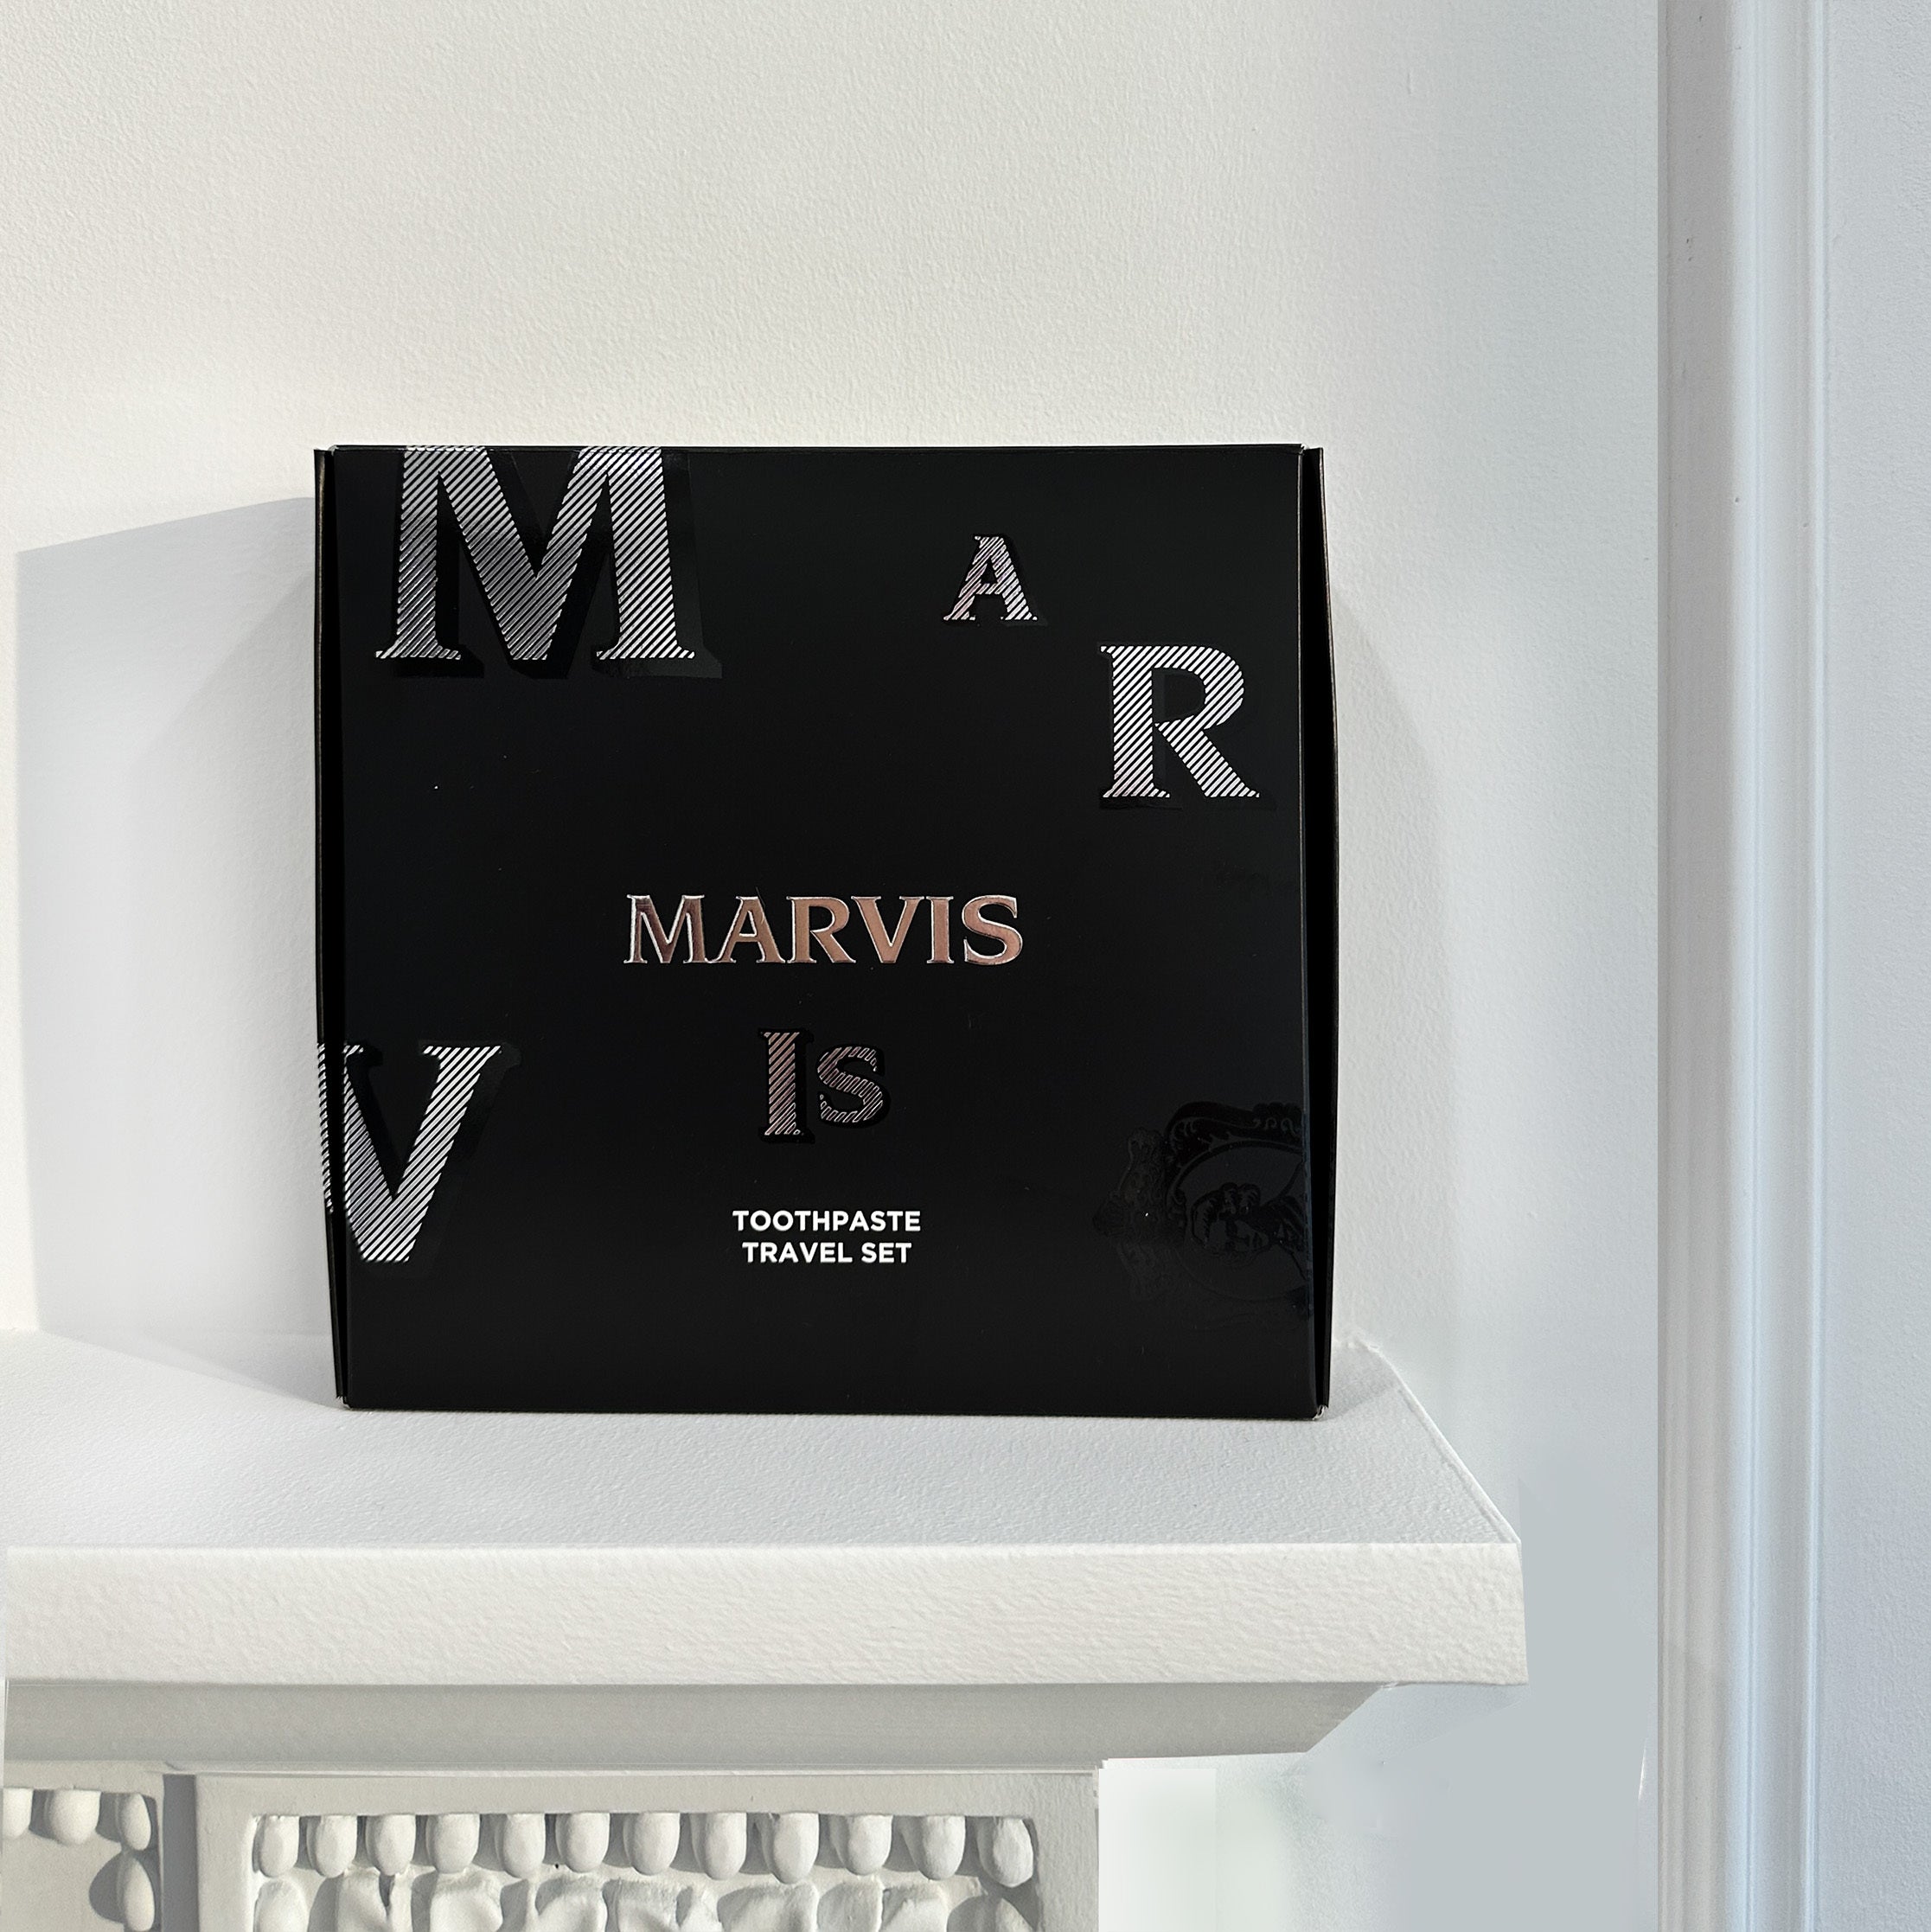 【NEW】MARVIS PERFECT for Gift - MARVIS